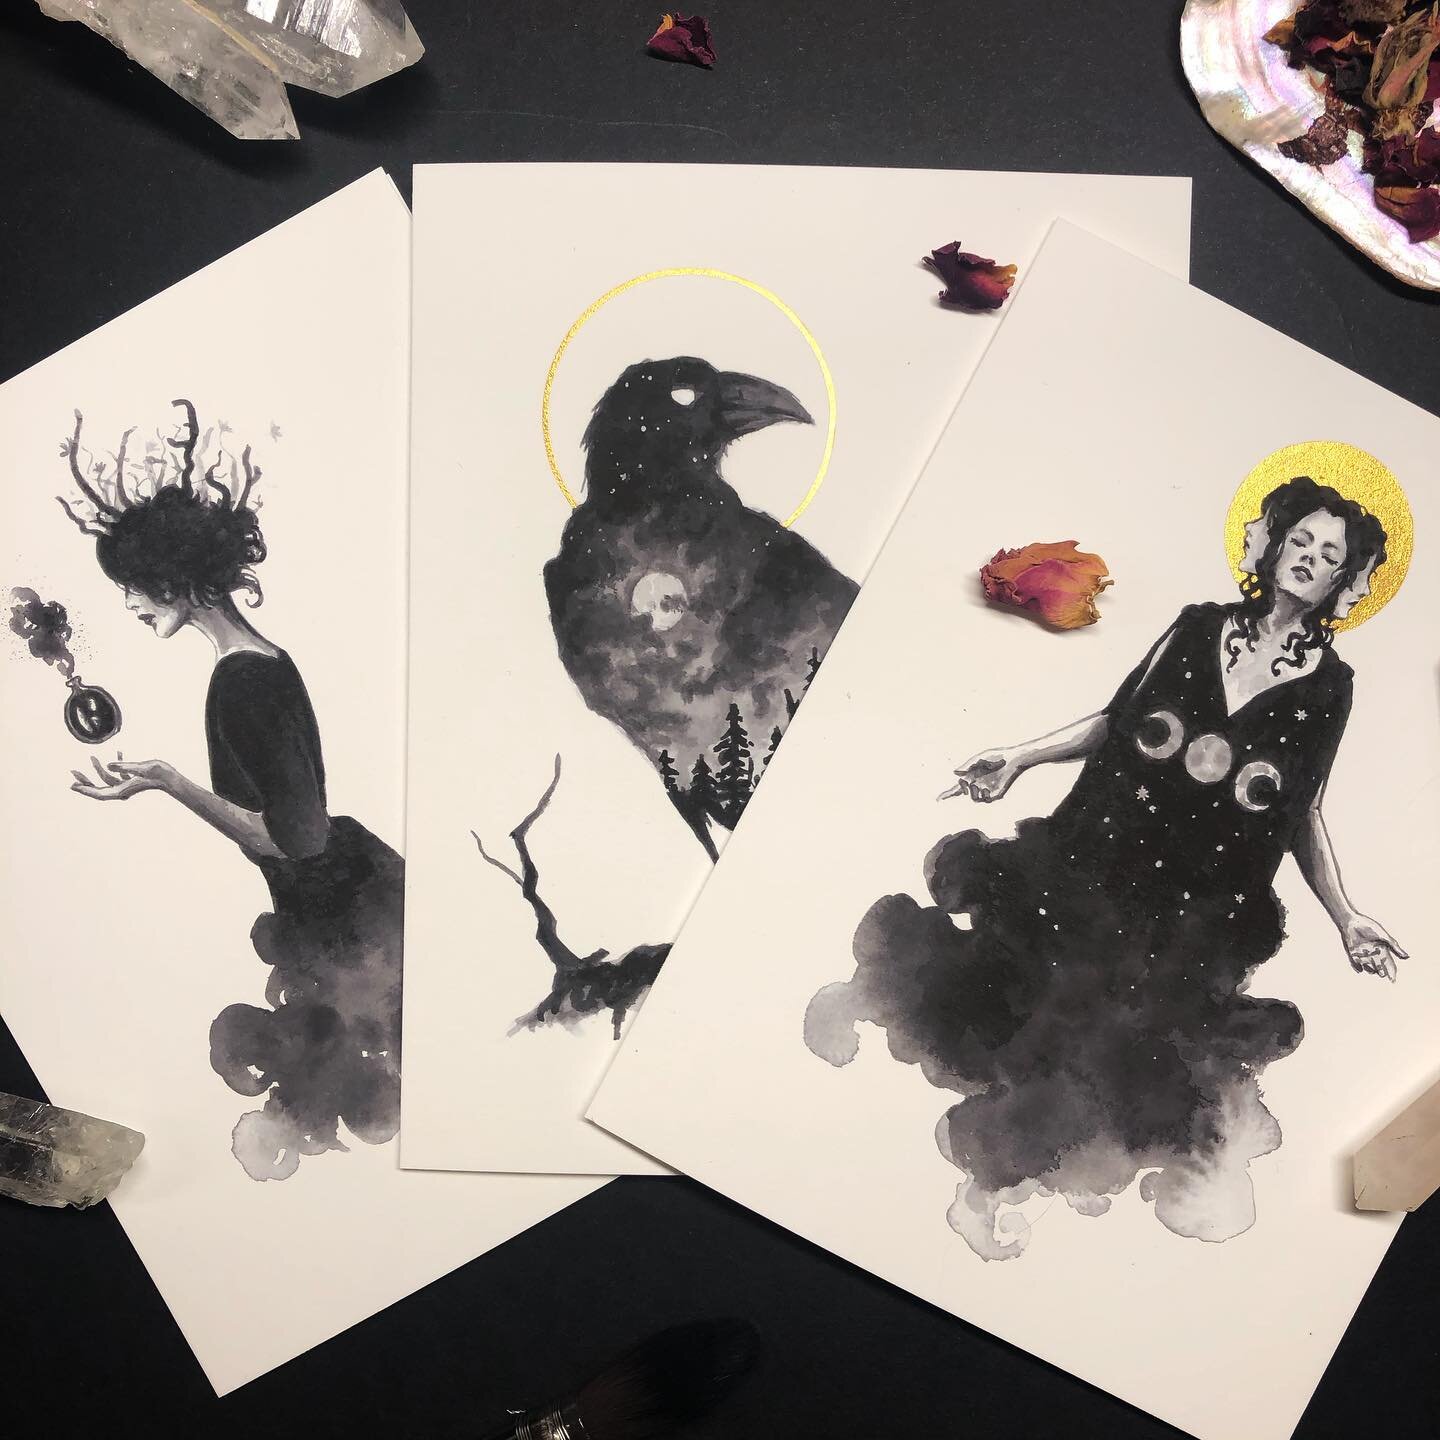 Just listed a few hand-embellished gift card sets ✨ Hecate x The Morrigan x Circe. There&rsquo;s only 6! 

My shop is closing down for a while on the 13th (this Sunday) so if there&rsquo;s anything you&rsquo;ve been eye-balling, now&rsquo;s the time 